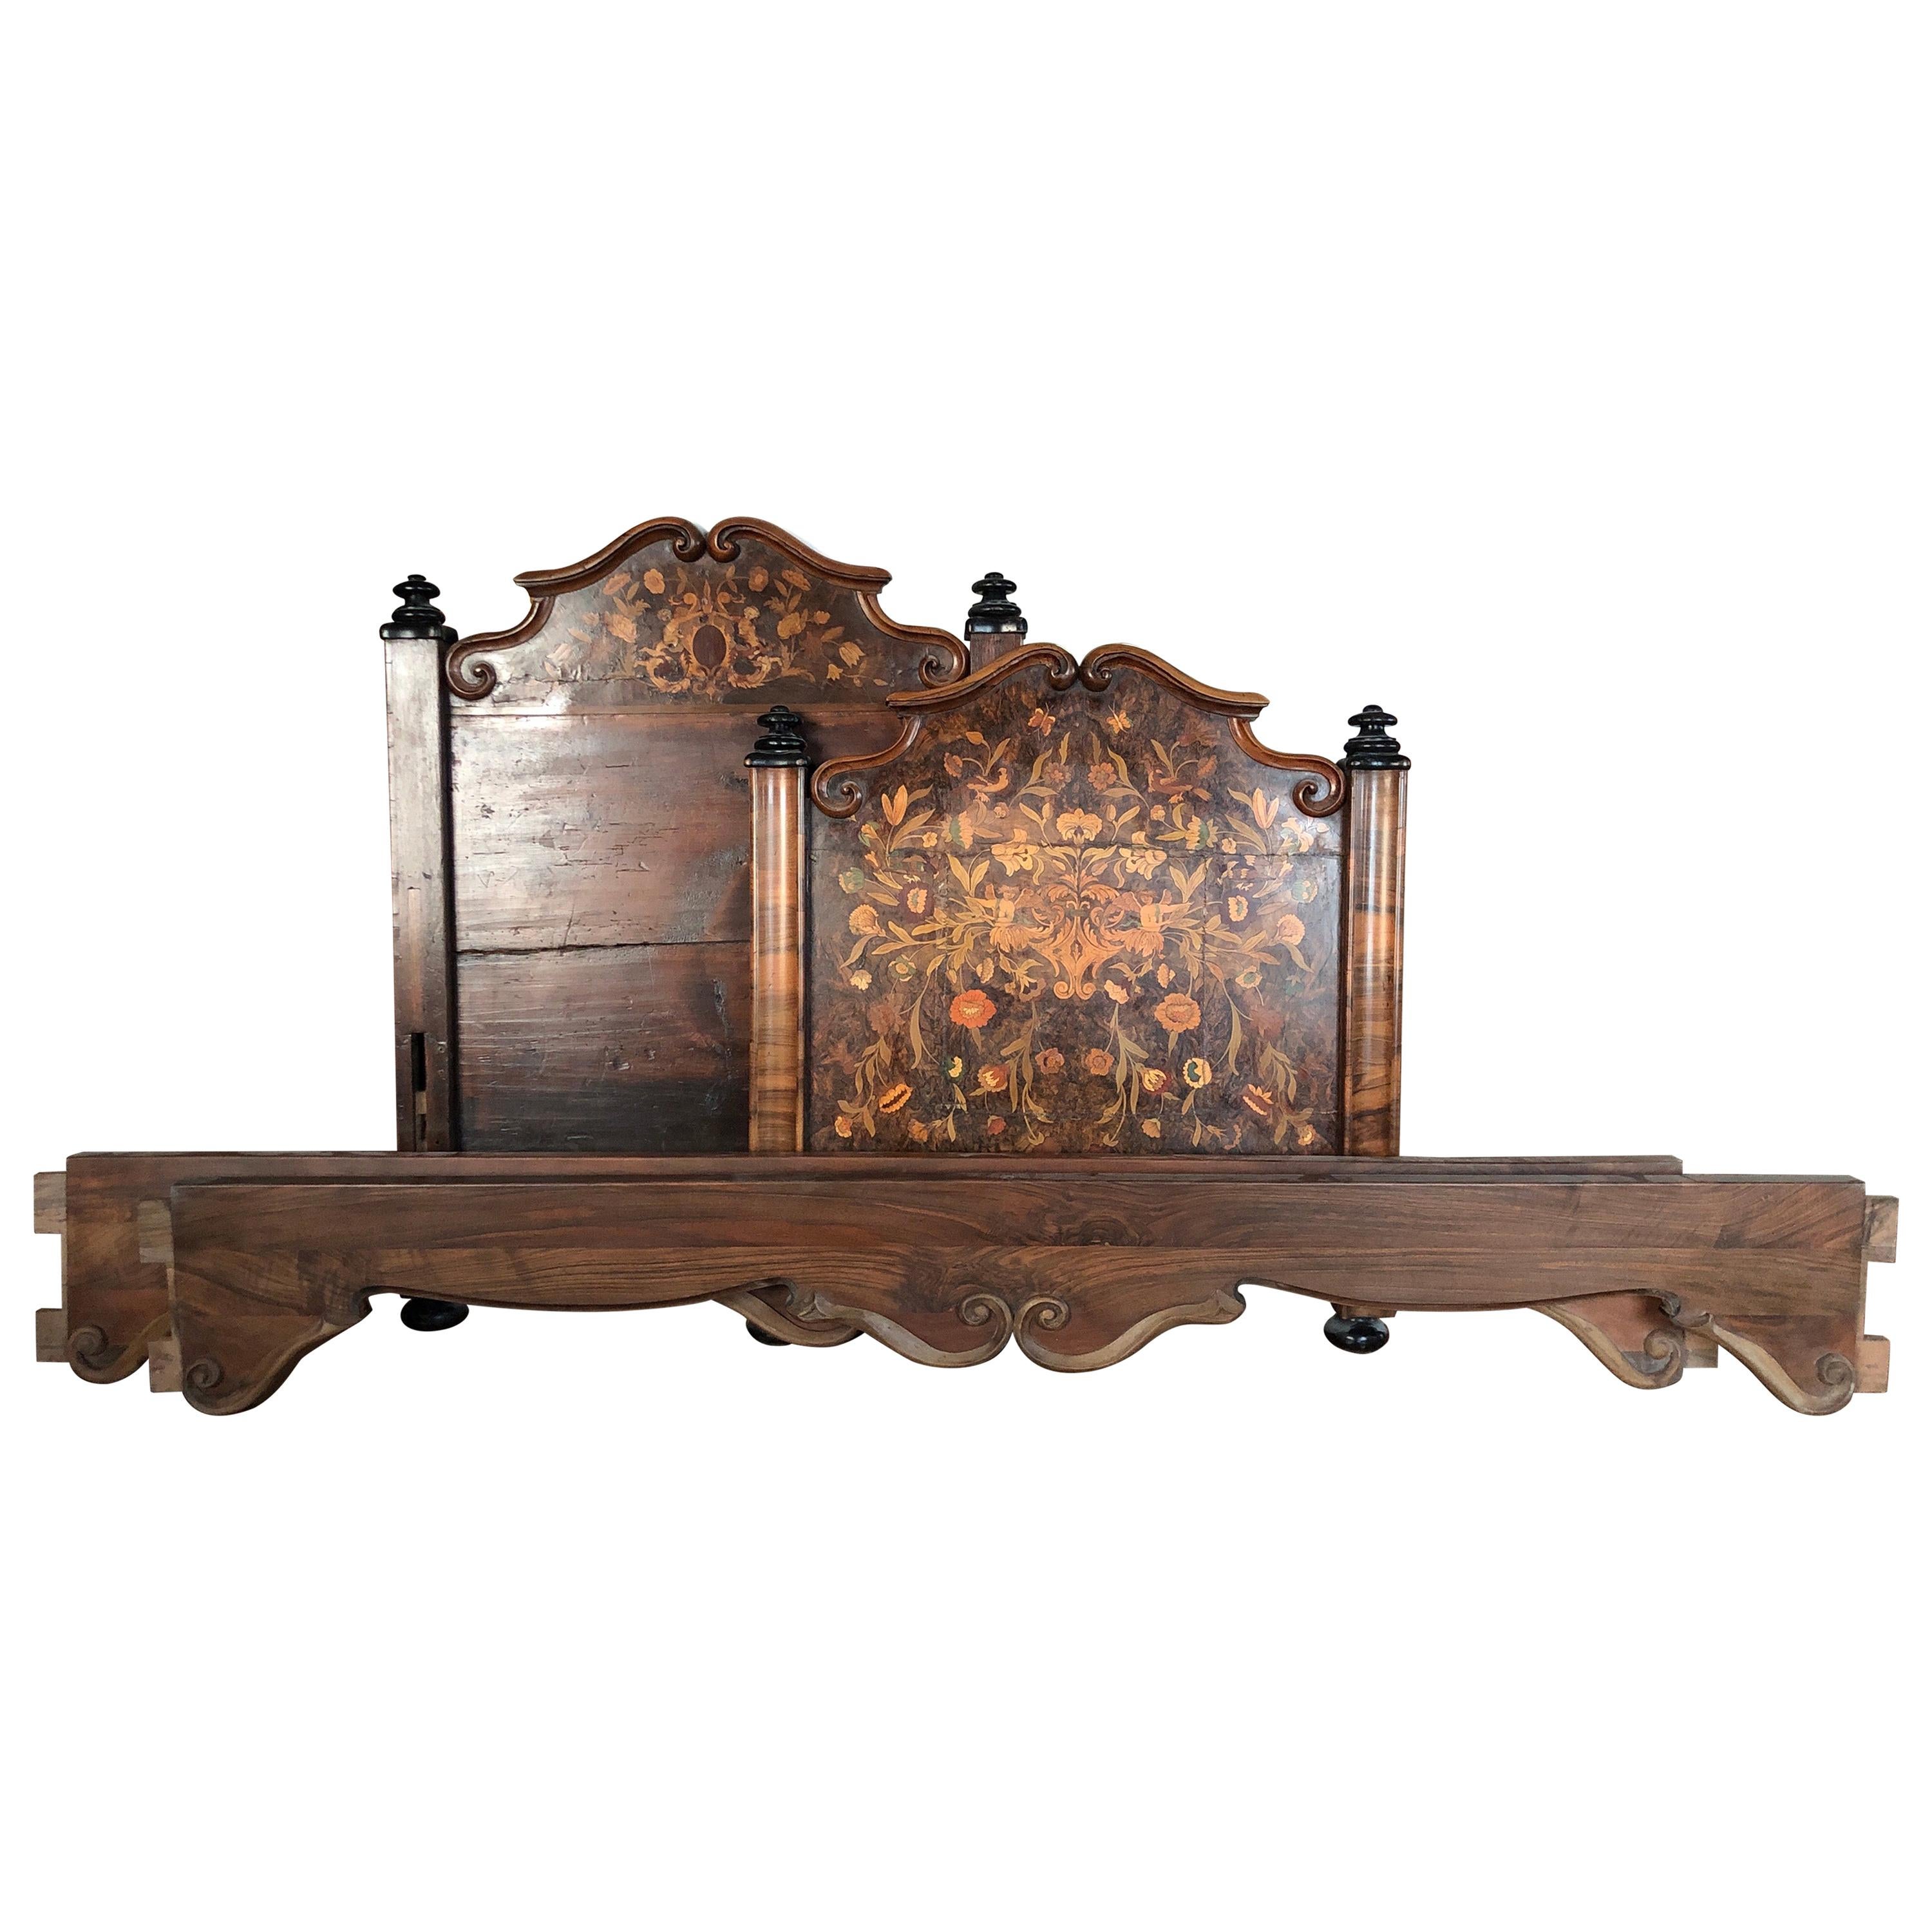 18th Century Dutch Marquetry Mahogany Single Bed Frame with Colorful Inlay